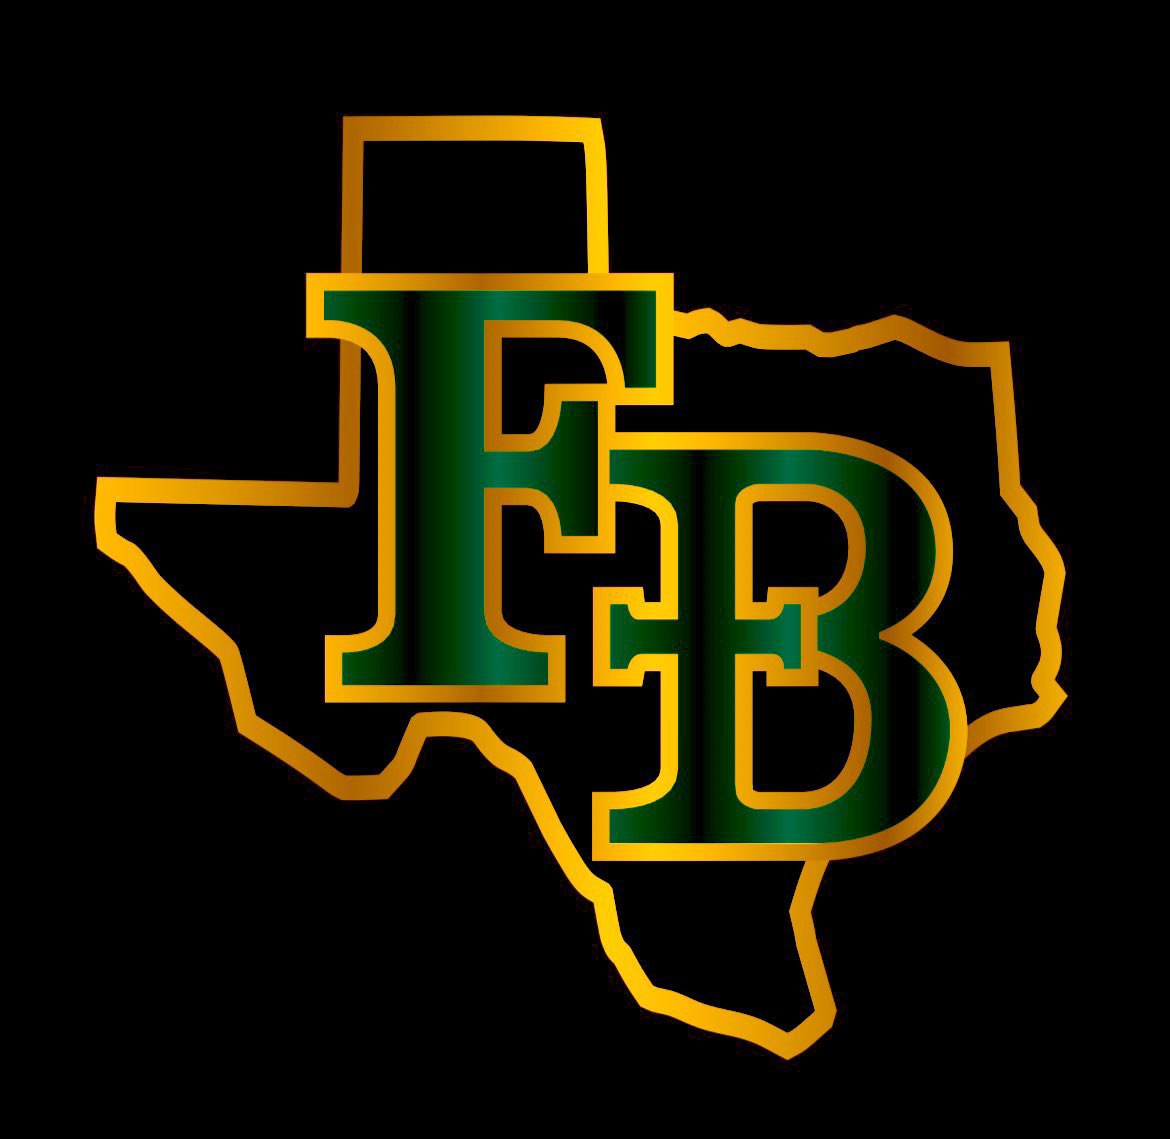 Fort Bend Christian Academy is still looking for a Varsity Football Game for Week 1 - August 30th. Please let me know if you’re interested or know of a team that may be interested. @TXPSPodcast @TXPrivateFBGuy @TXTopTalent @vypehouston @Matt_Stepp817 @TeamLSCSN